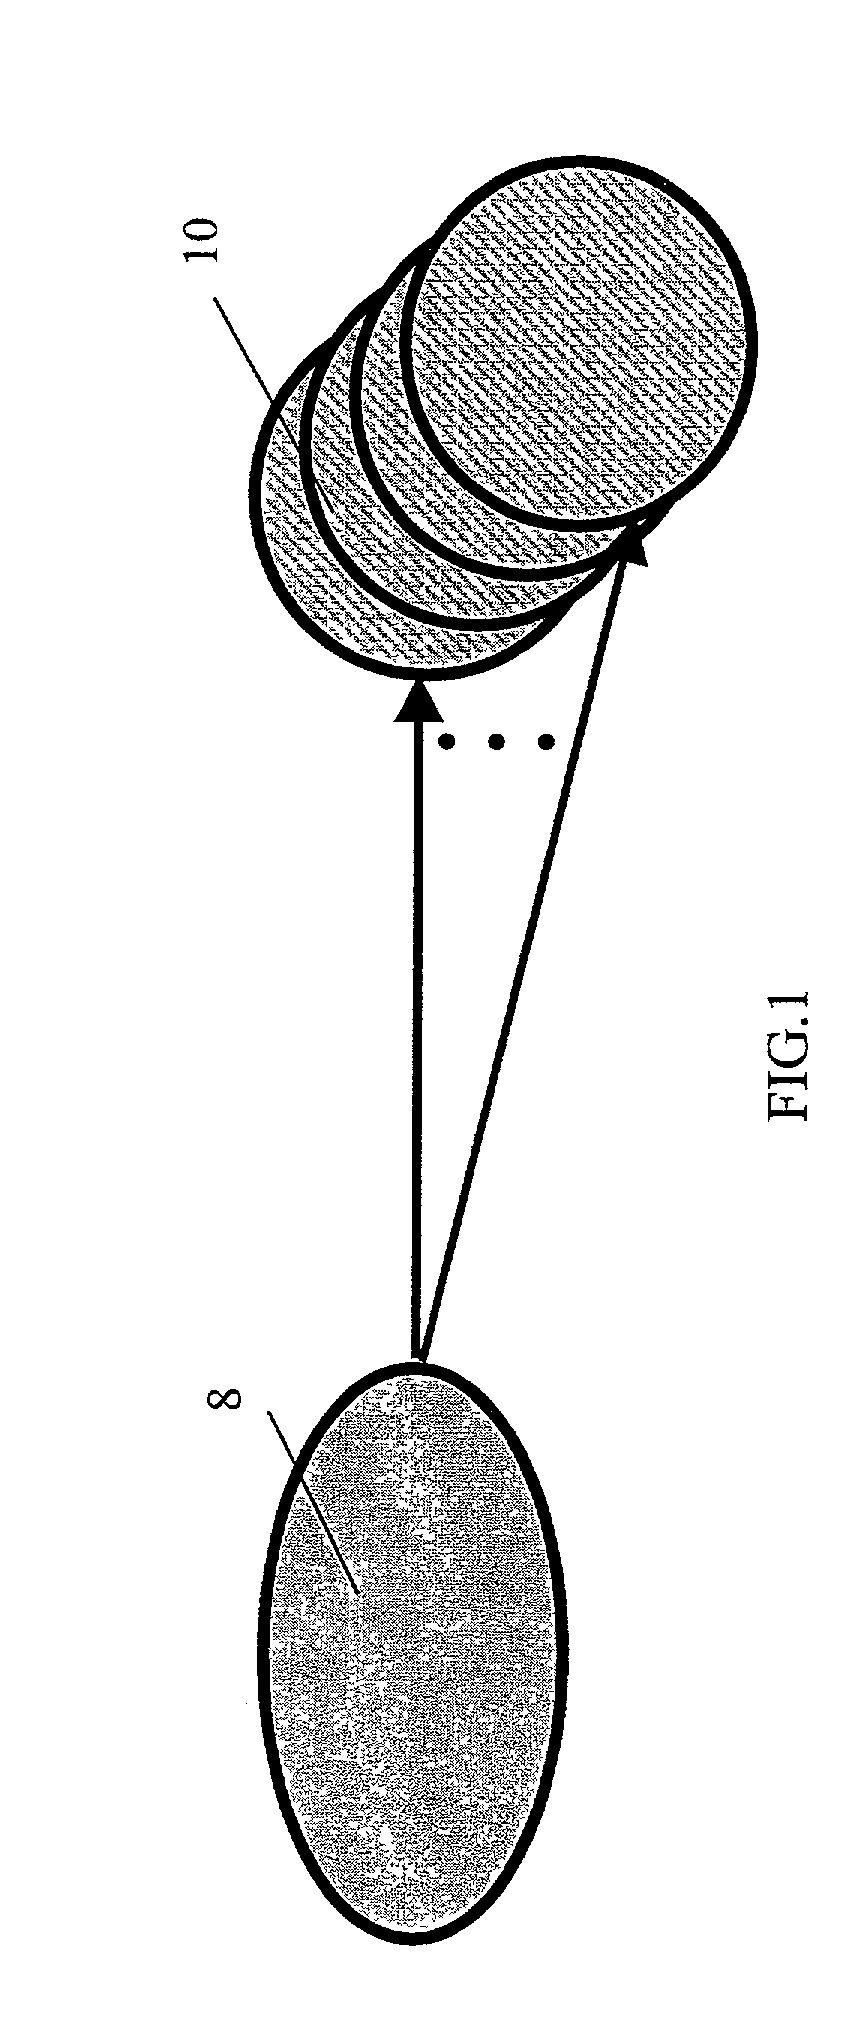 Method and system for producing an ordered compilation of information with more than one author contributing information contemporaneously